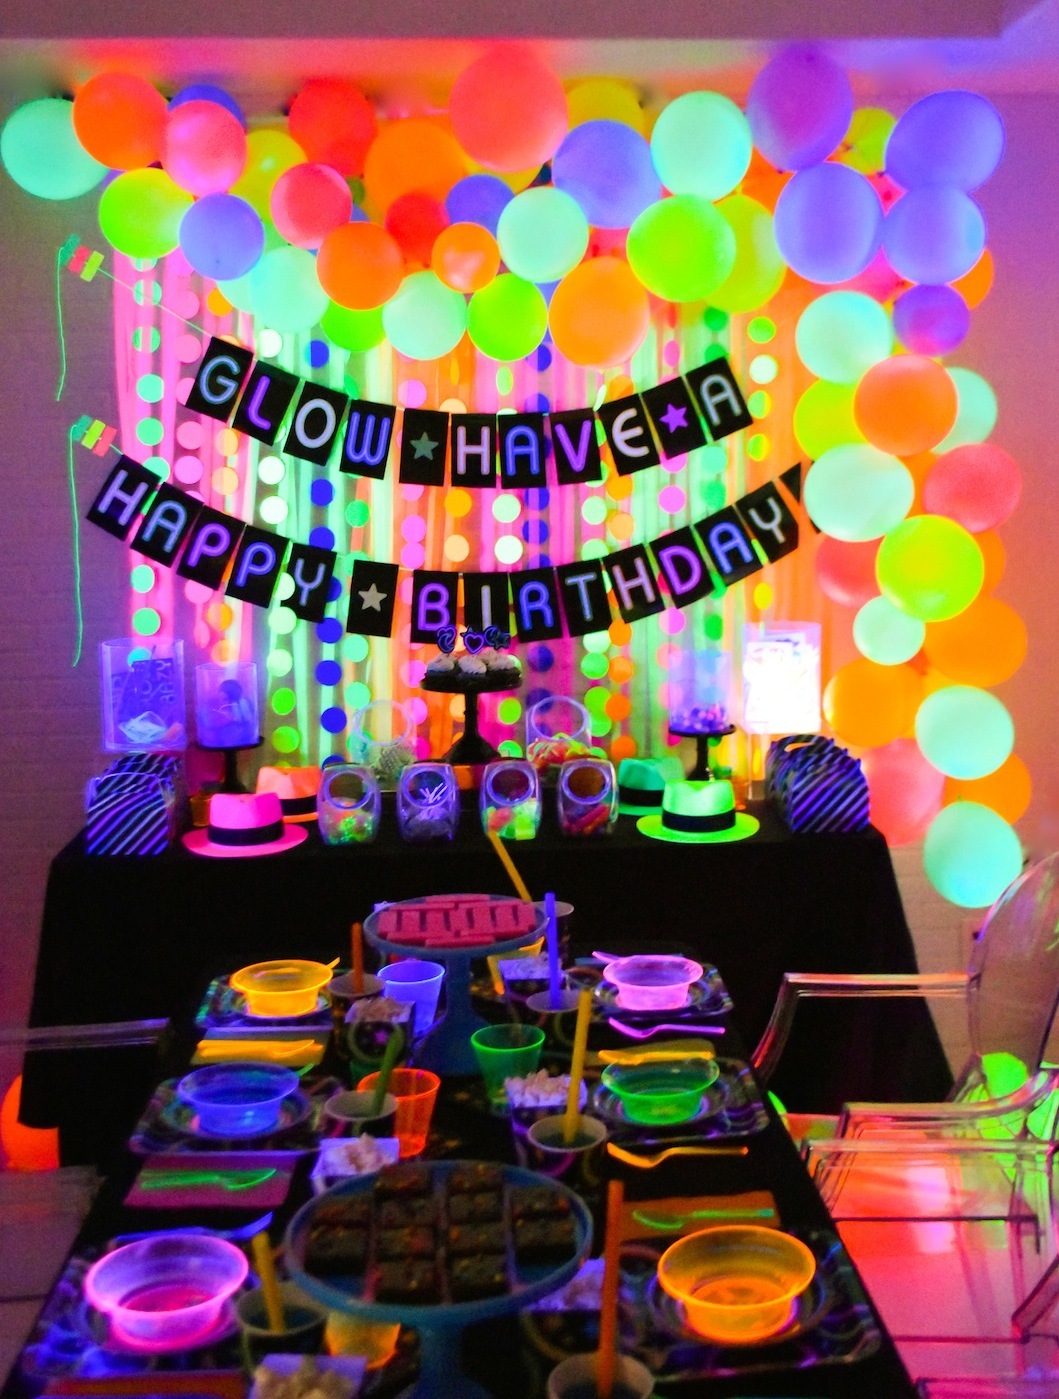 WHAT YOU NEED TO PLAN AN EPIC GLOW IN THE DARK PARTY - DIY BLACK